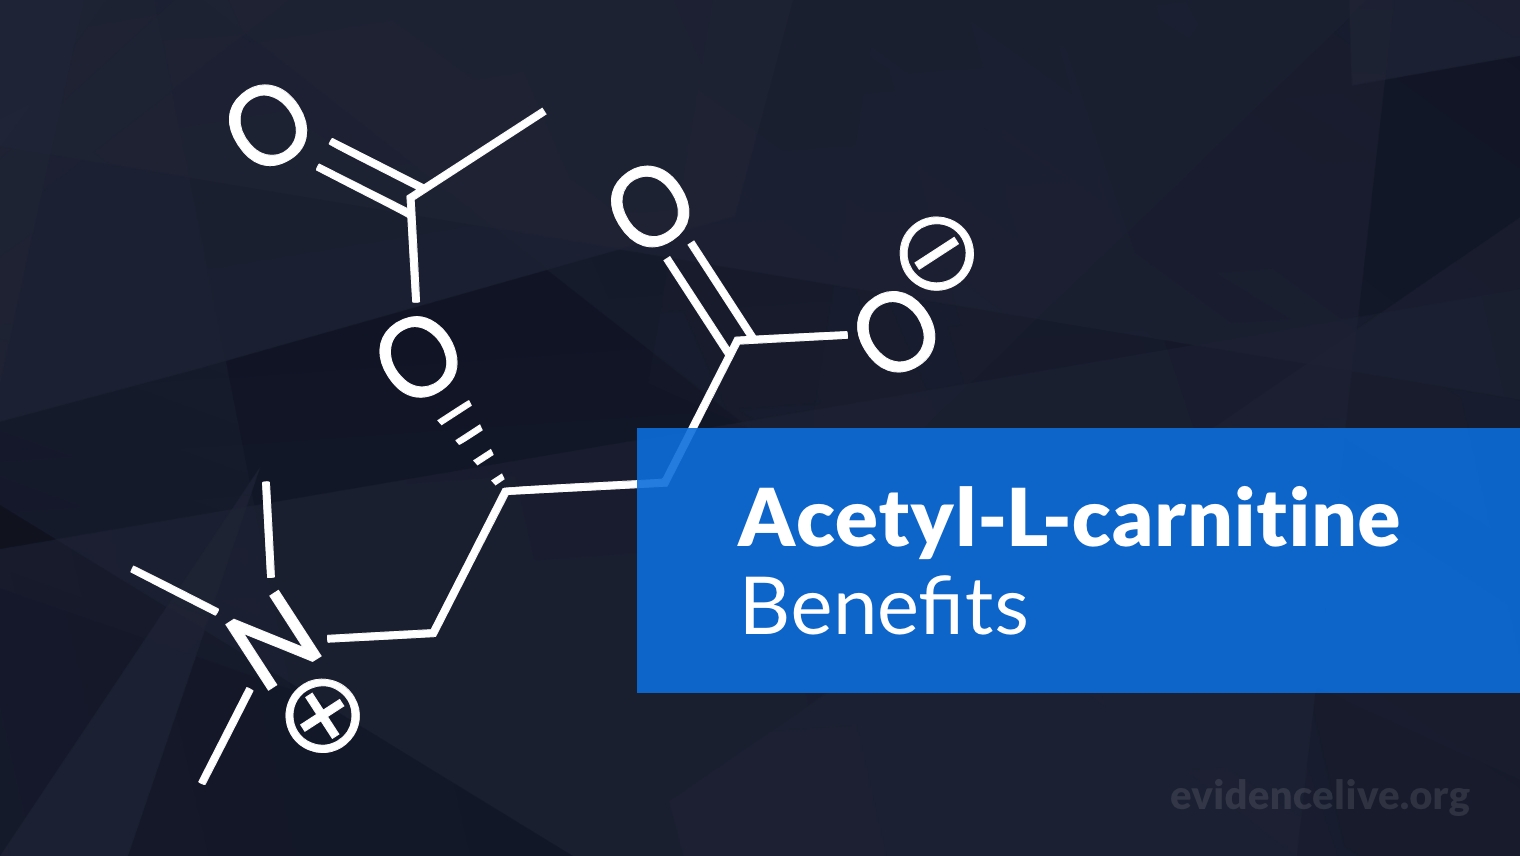 Acetyl-L-carnitine: Benefits, Uses, Dosage, and Side Effects